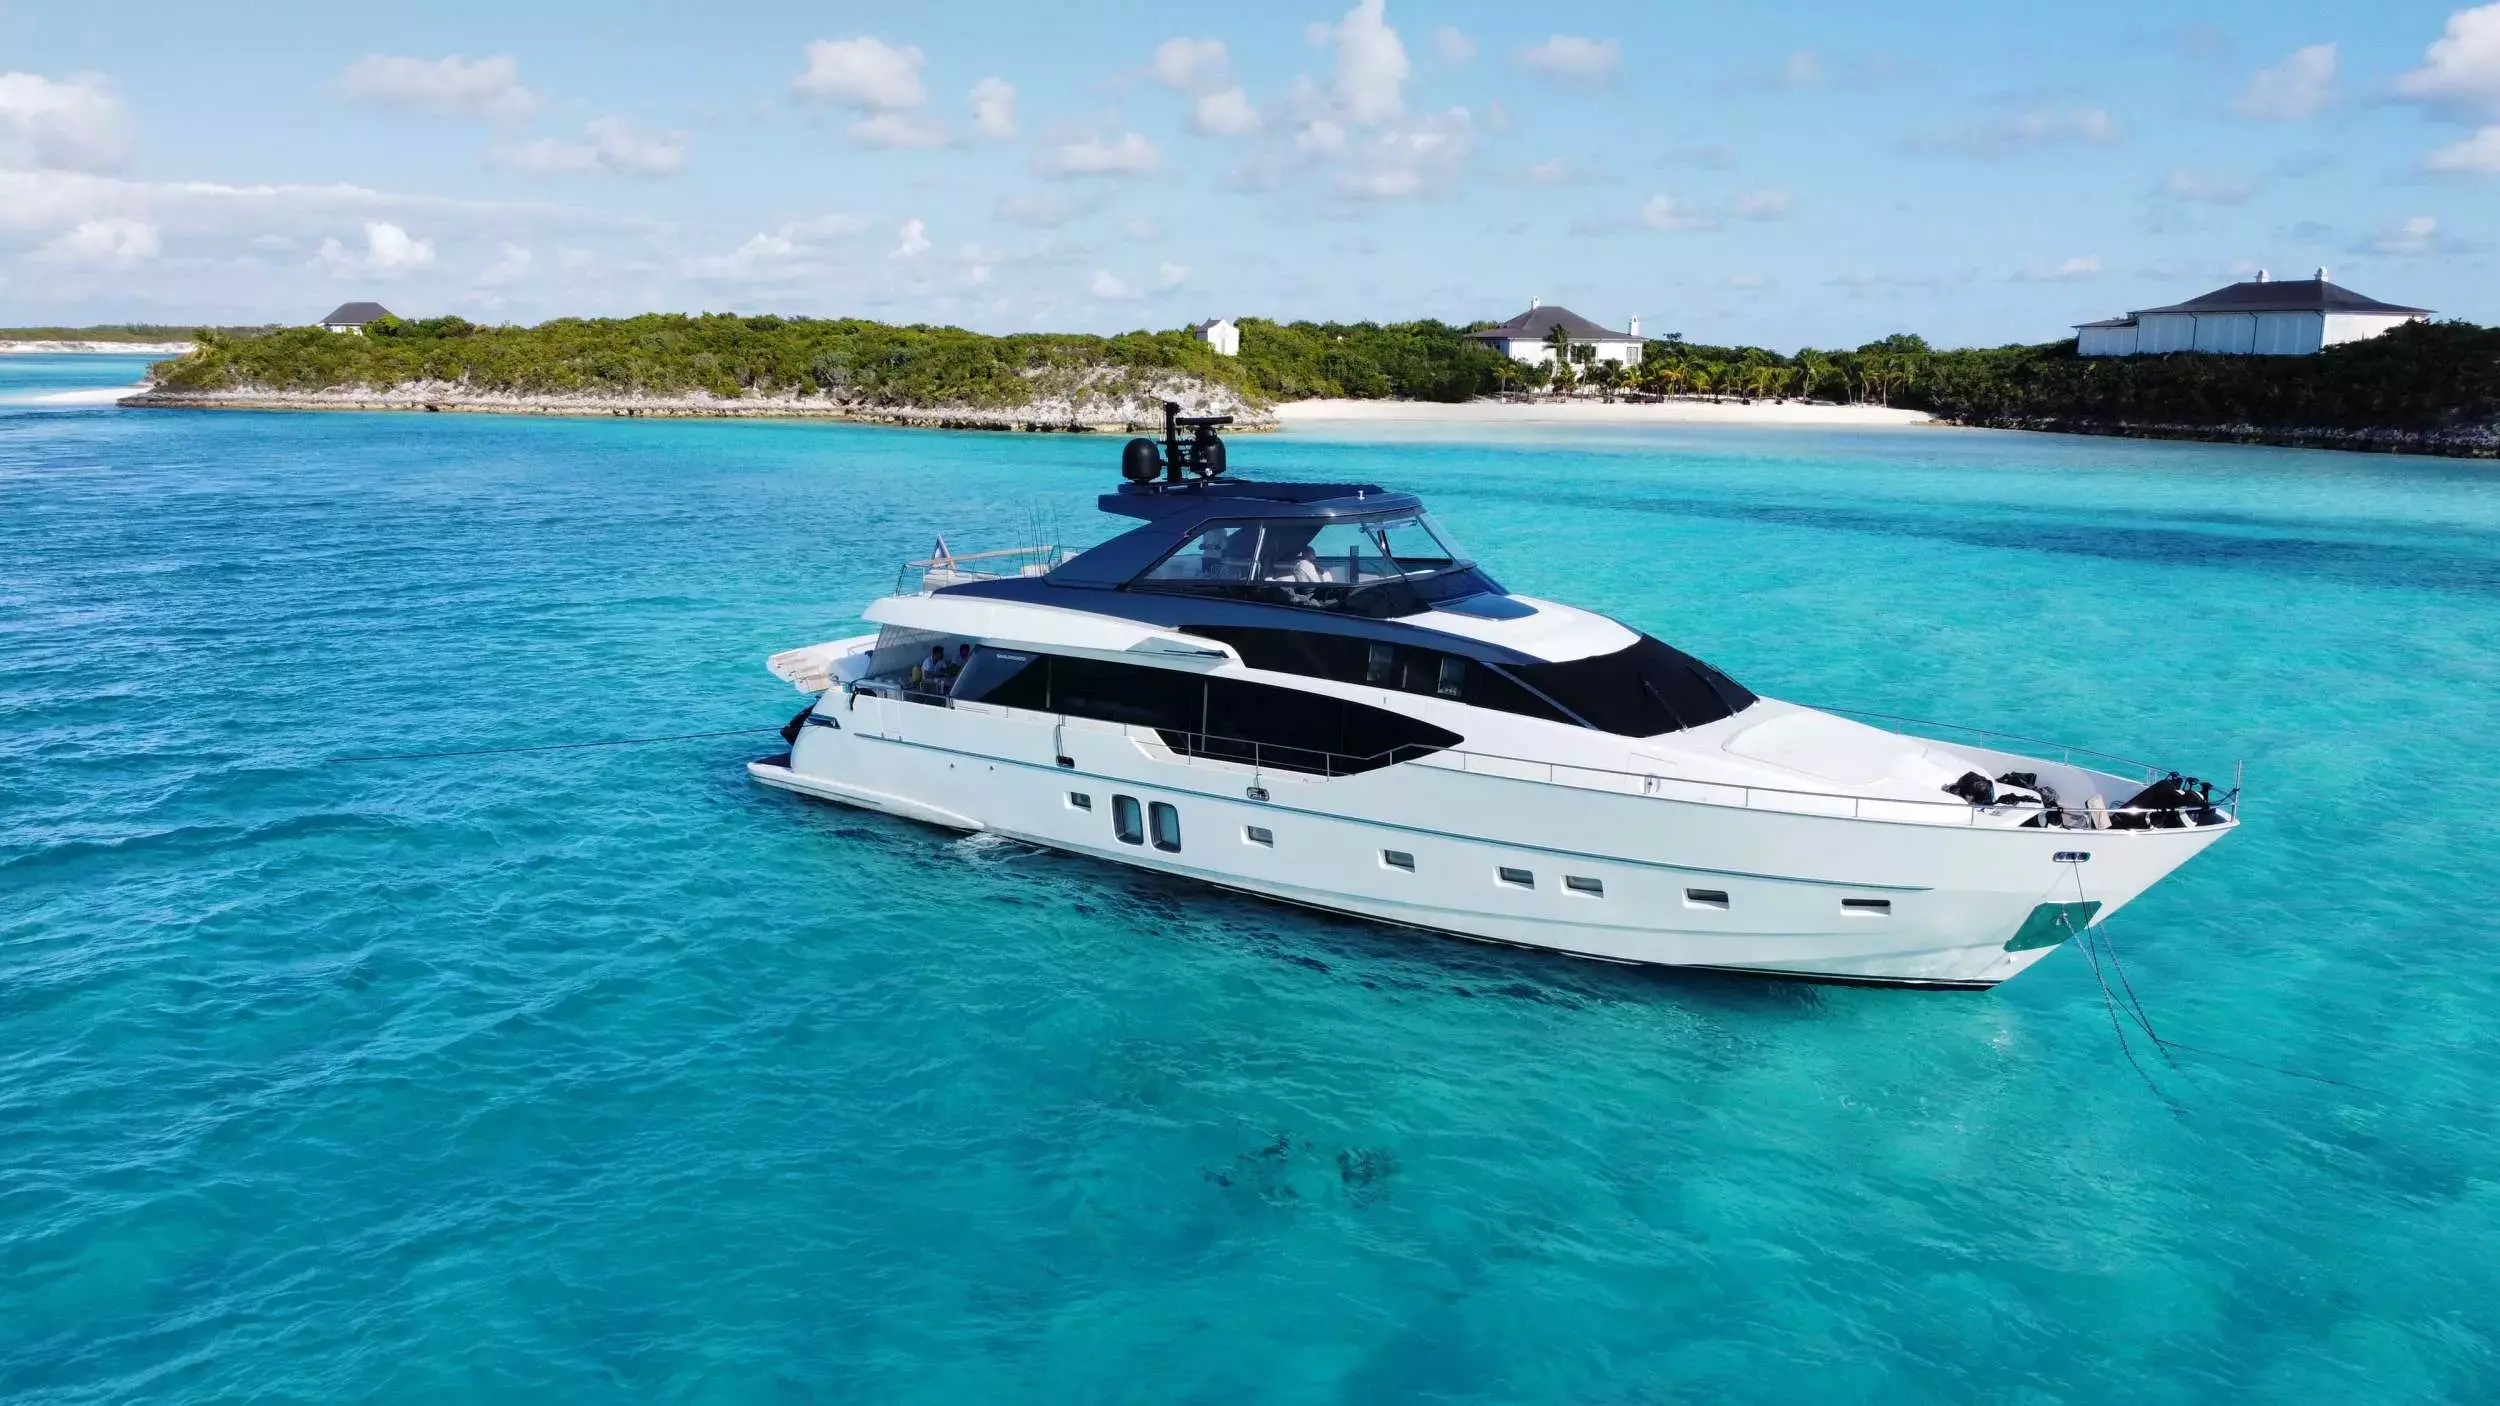 C-Daze by Sanlorenzo - Top rates for a Charter of a private Motor Yacht in Bahamas